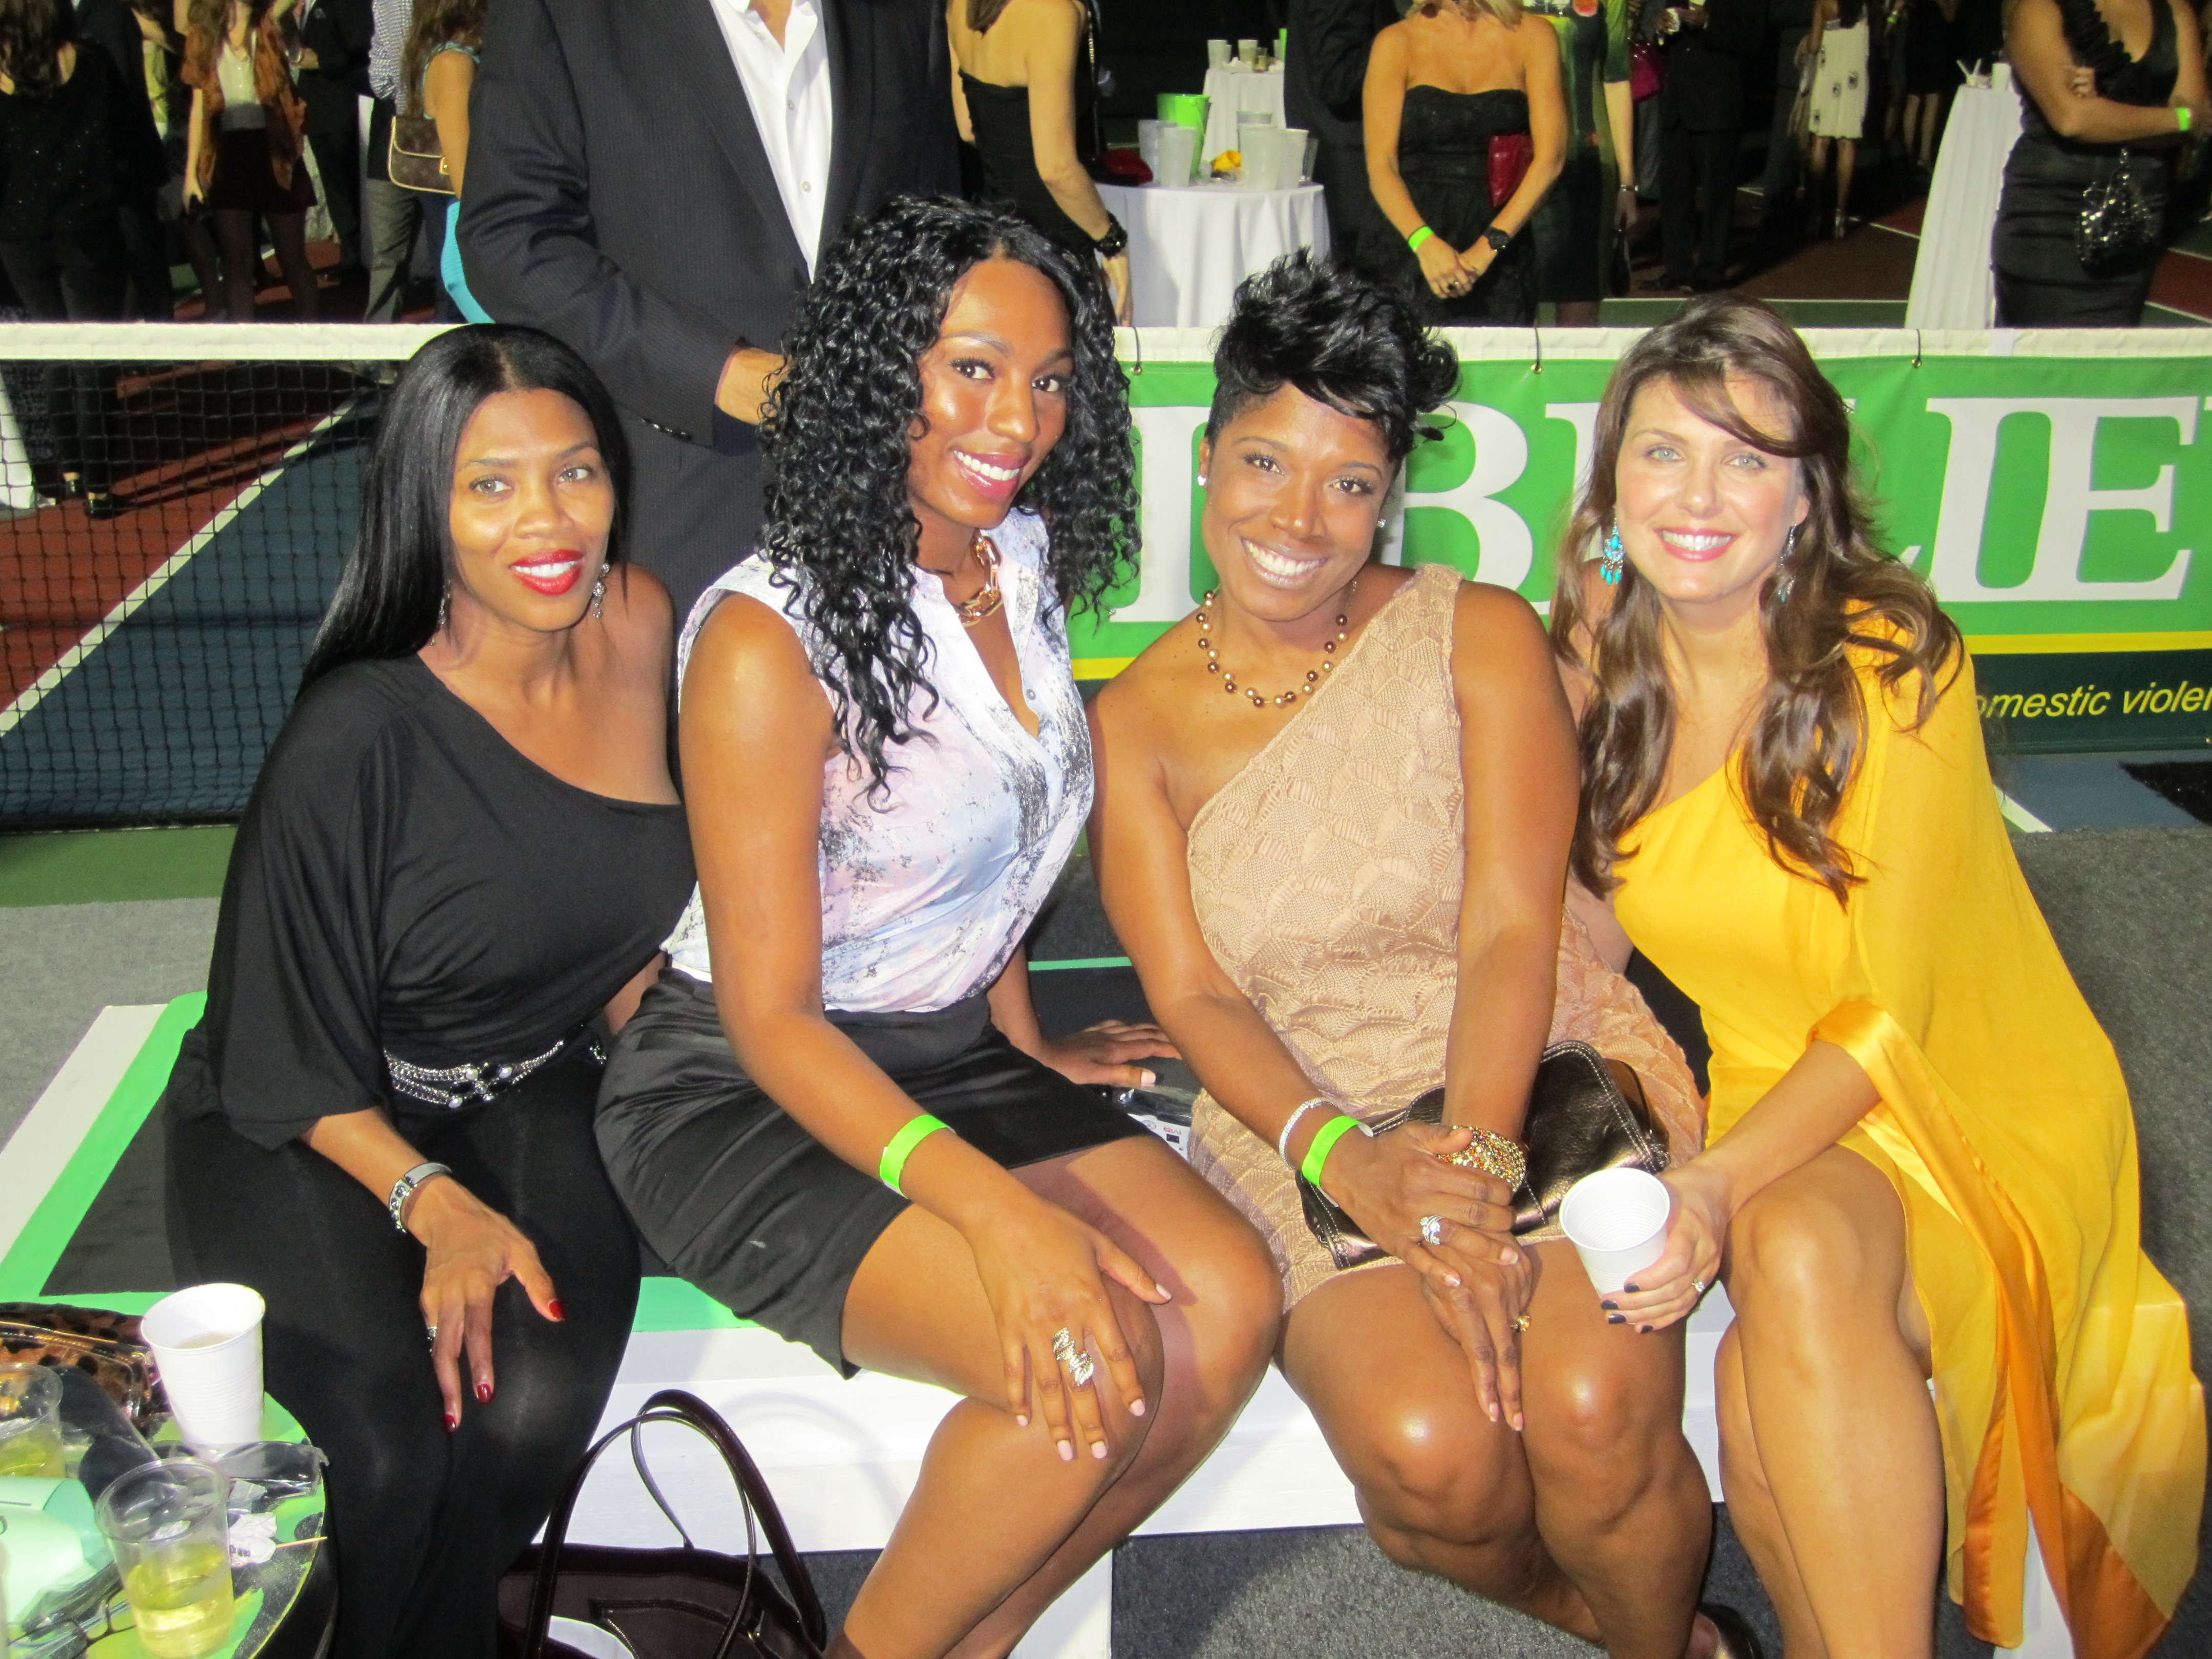 [Party Pix] DC’s Top Athletes Sport Styles at Walk This Way Fashion Show